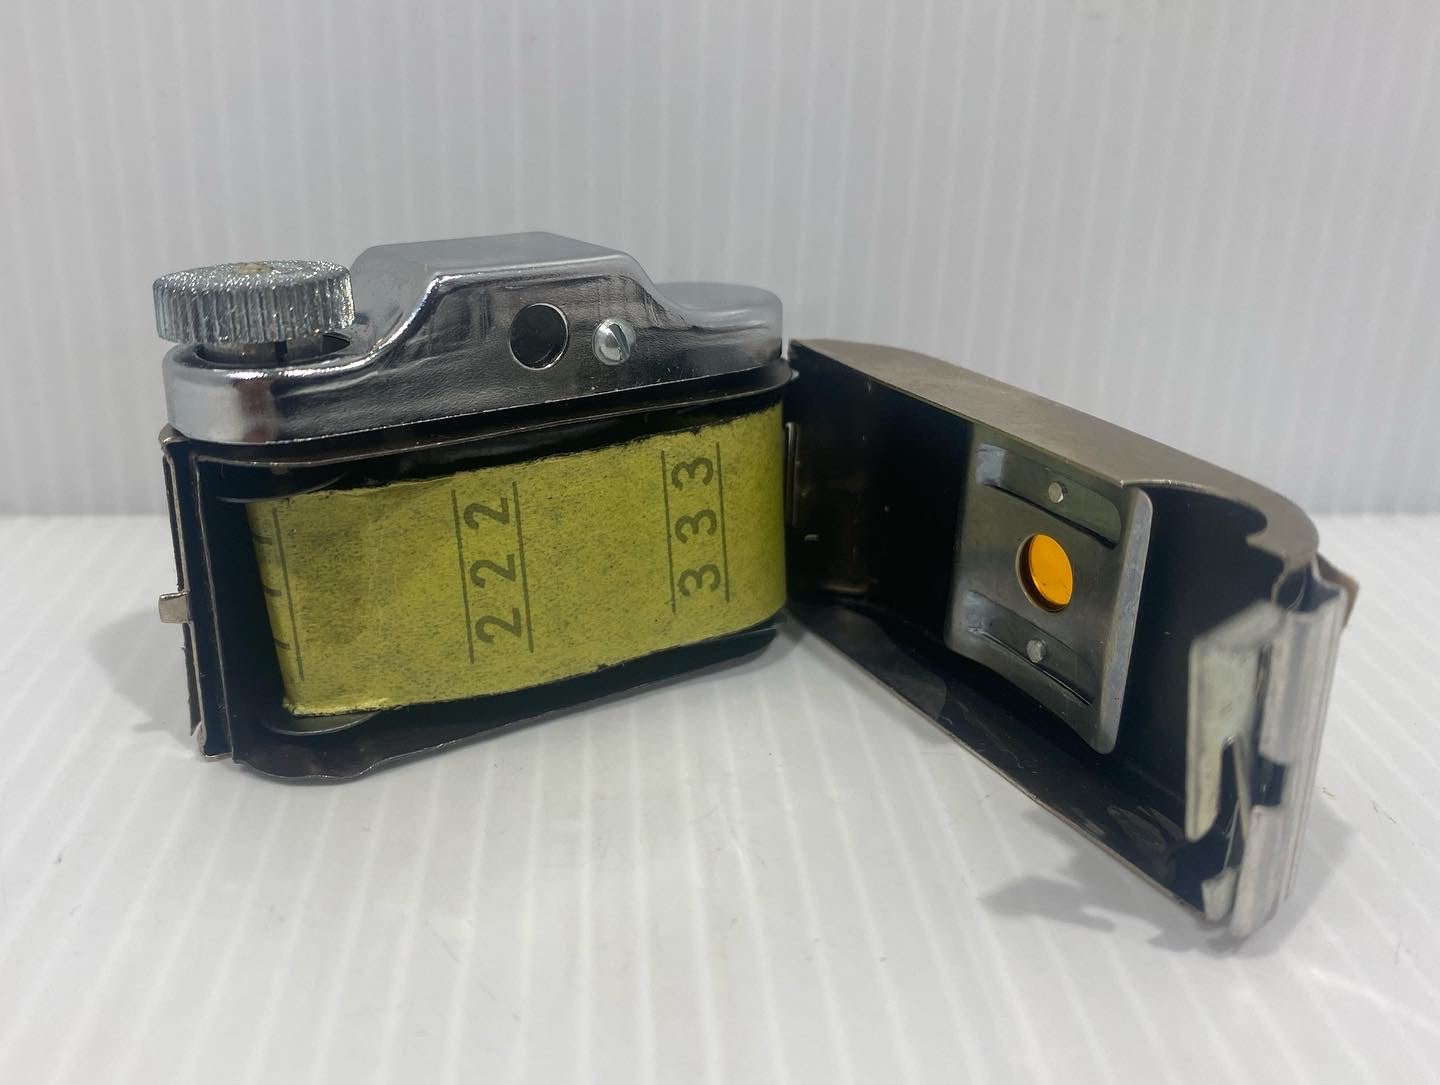 Vintage 1950's Miniature Crystar Spy Camera With original box. Made in Japan!